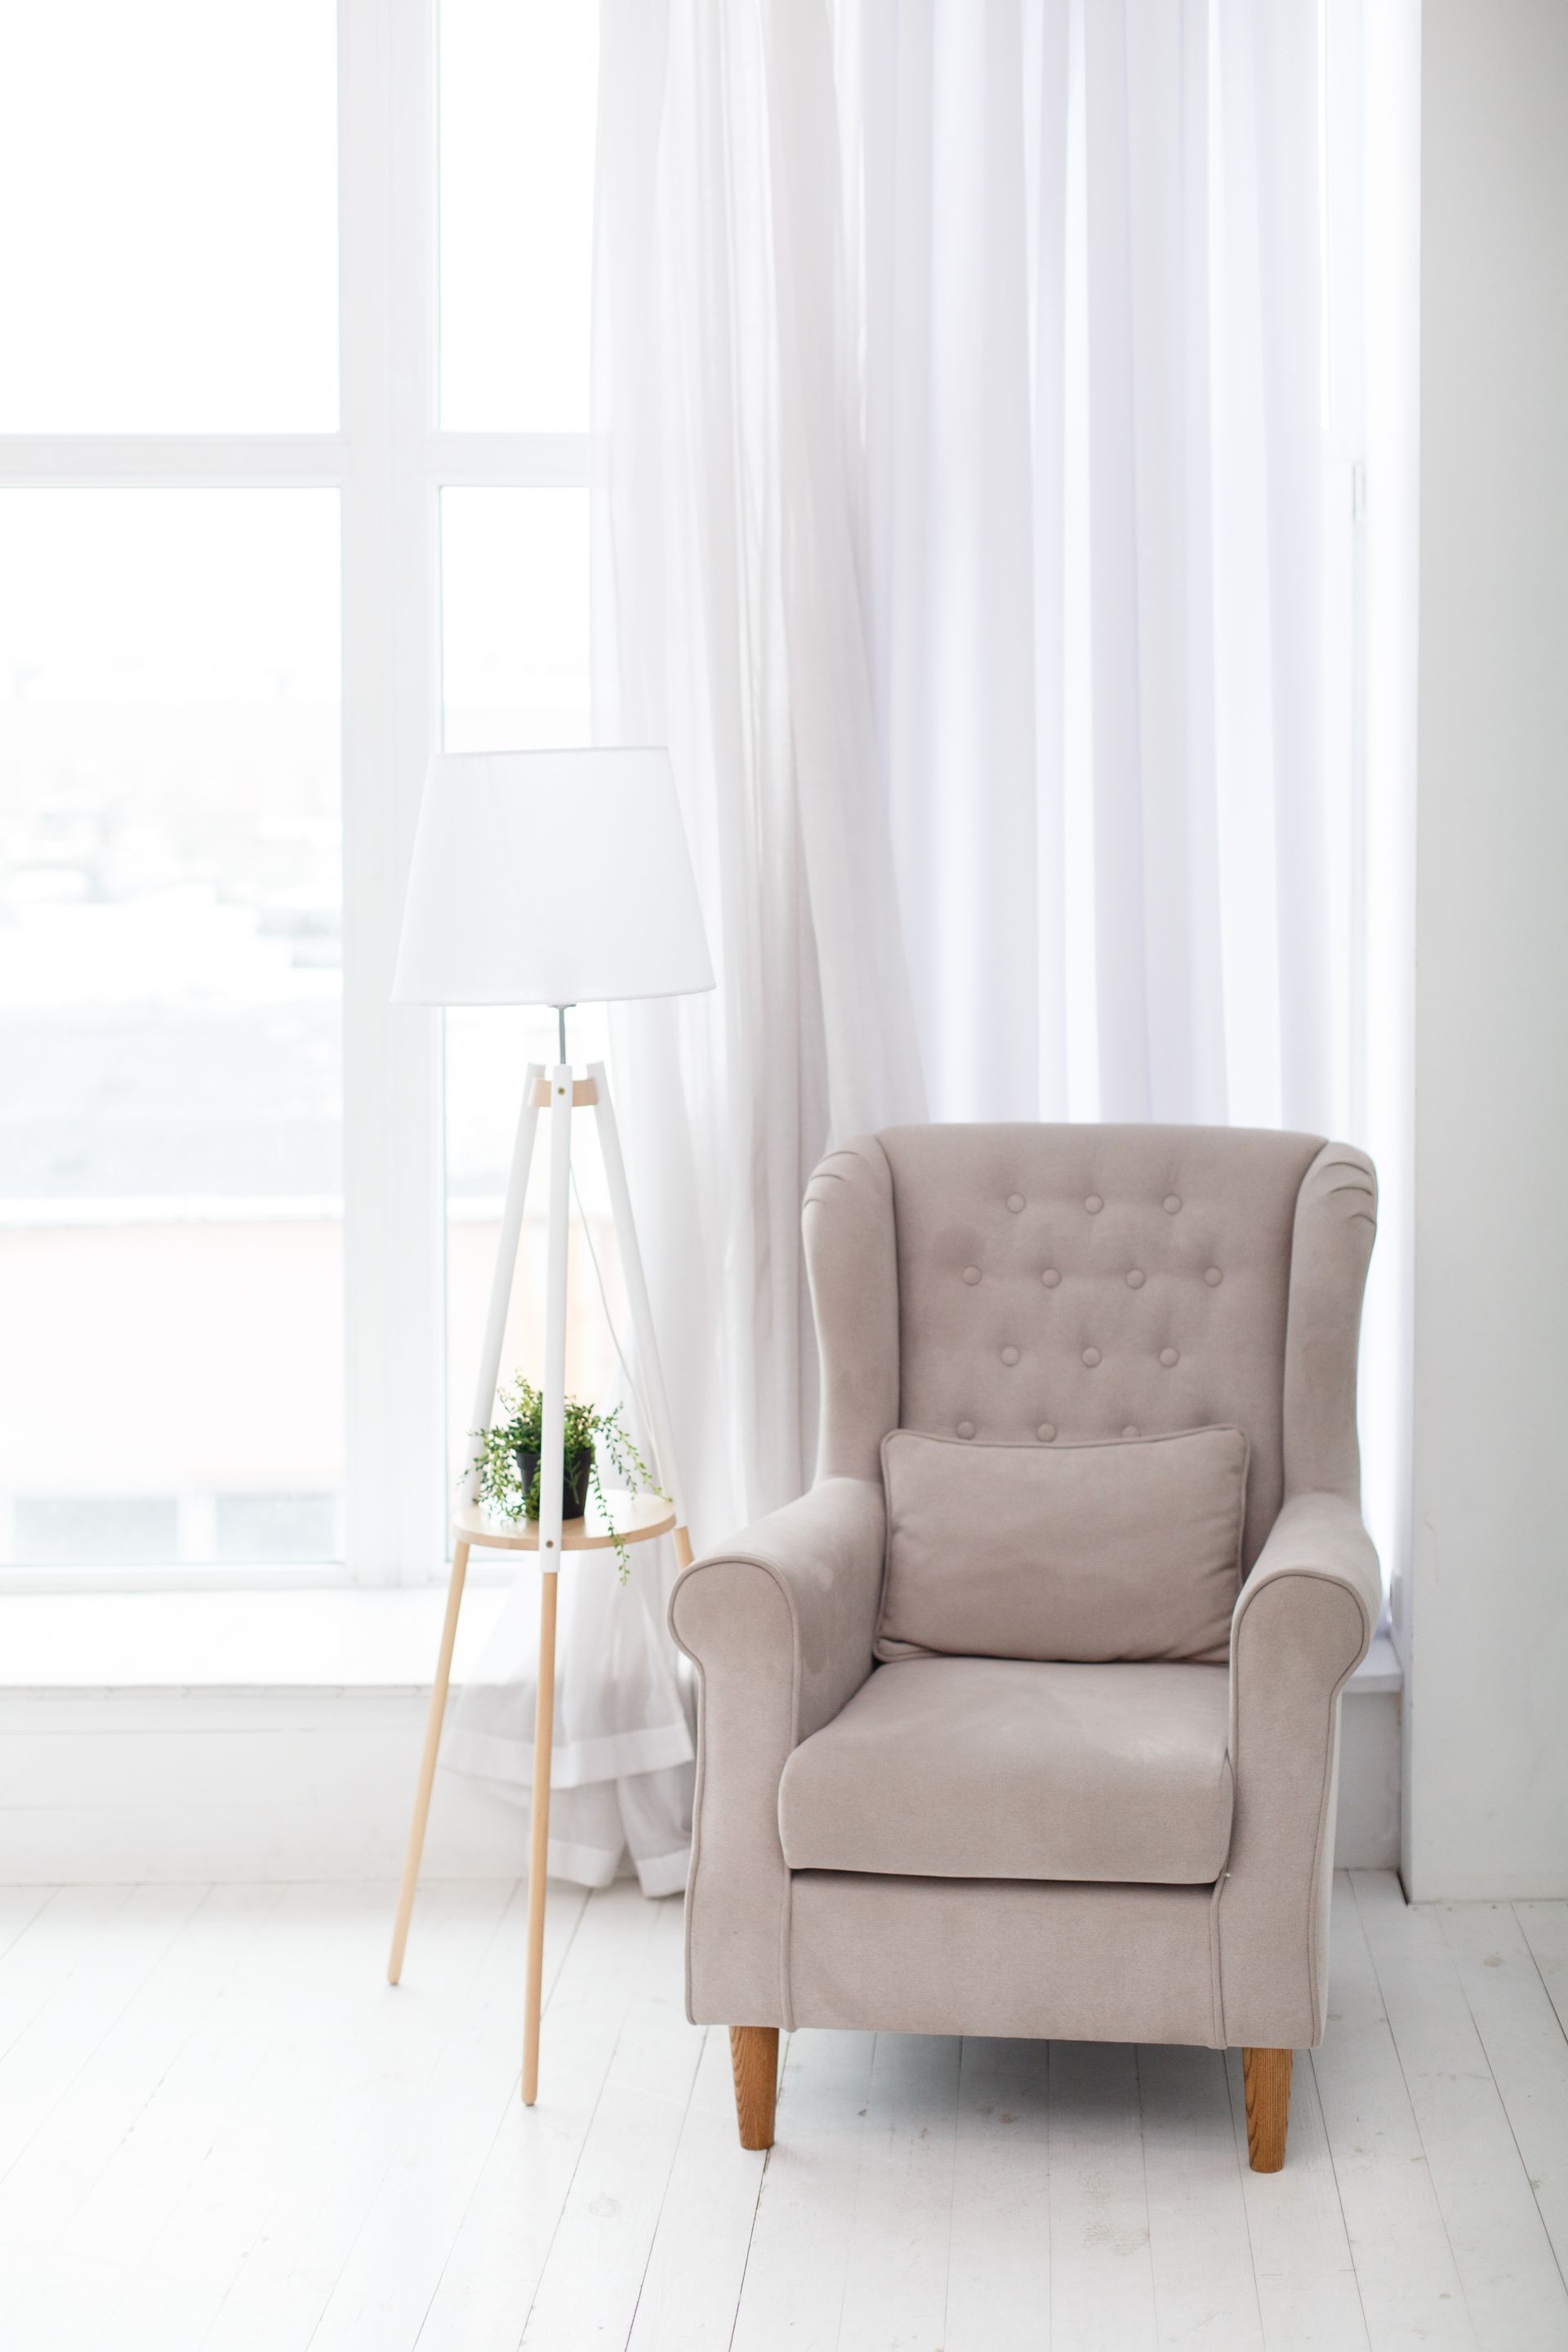 Classic soft armchair near the window in a room. Classic simple interior